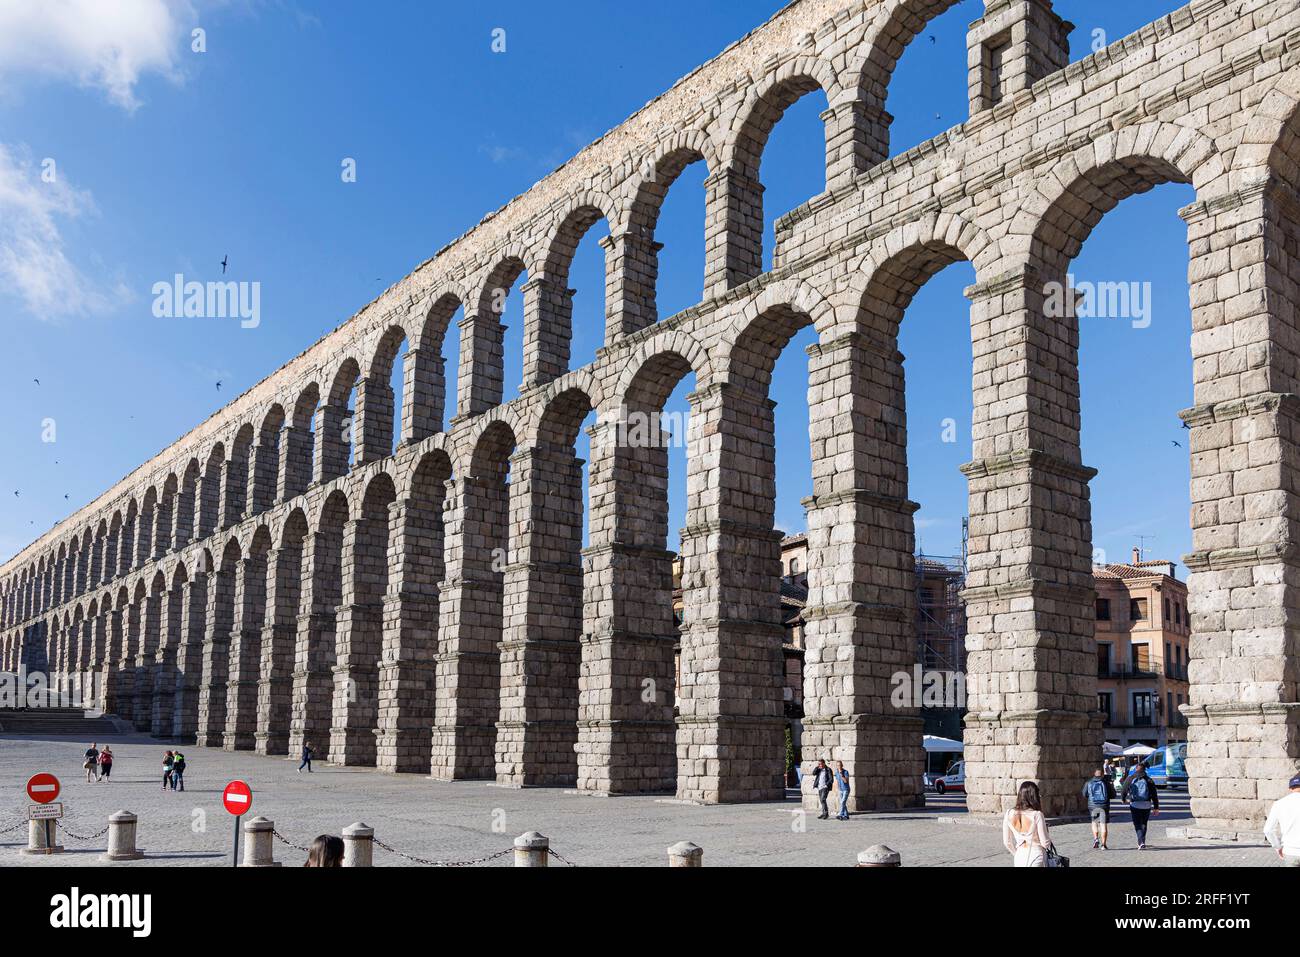 Spain, Castile and Leon, Segovia, Old Town of Segovia and its Aqueduct listed as World Heritage by UNESCO, the roman aqueduct Stock Photo